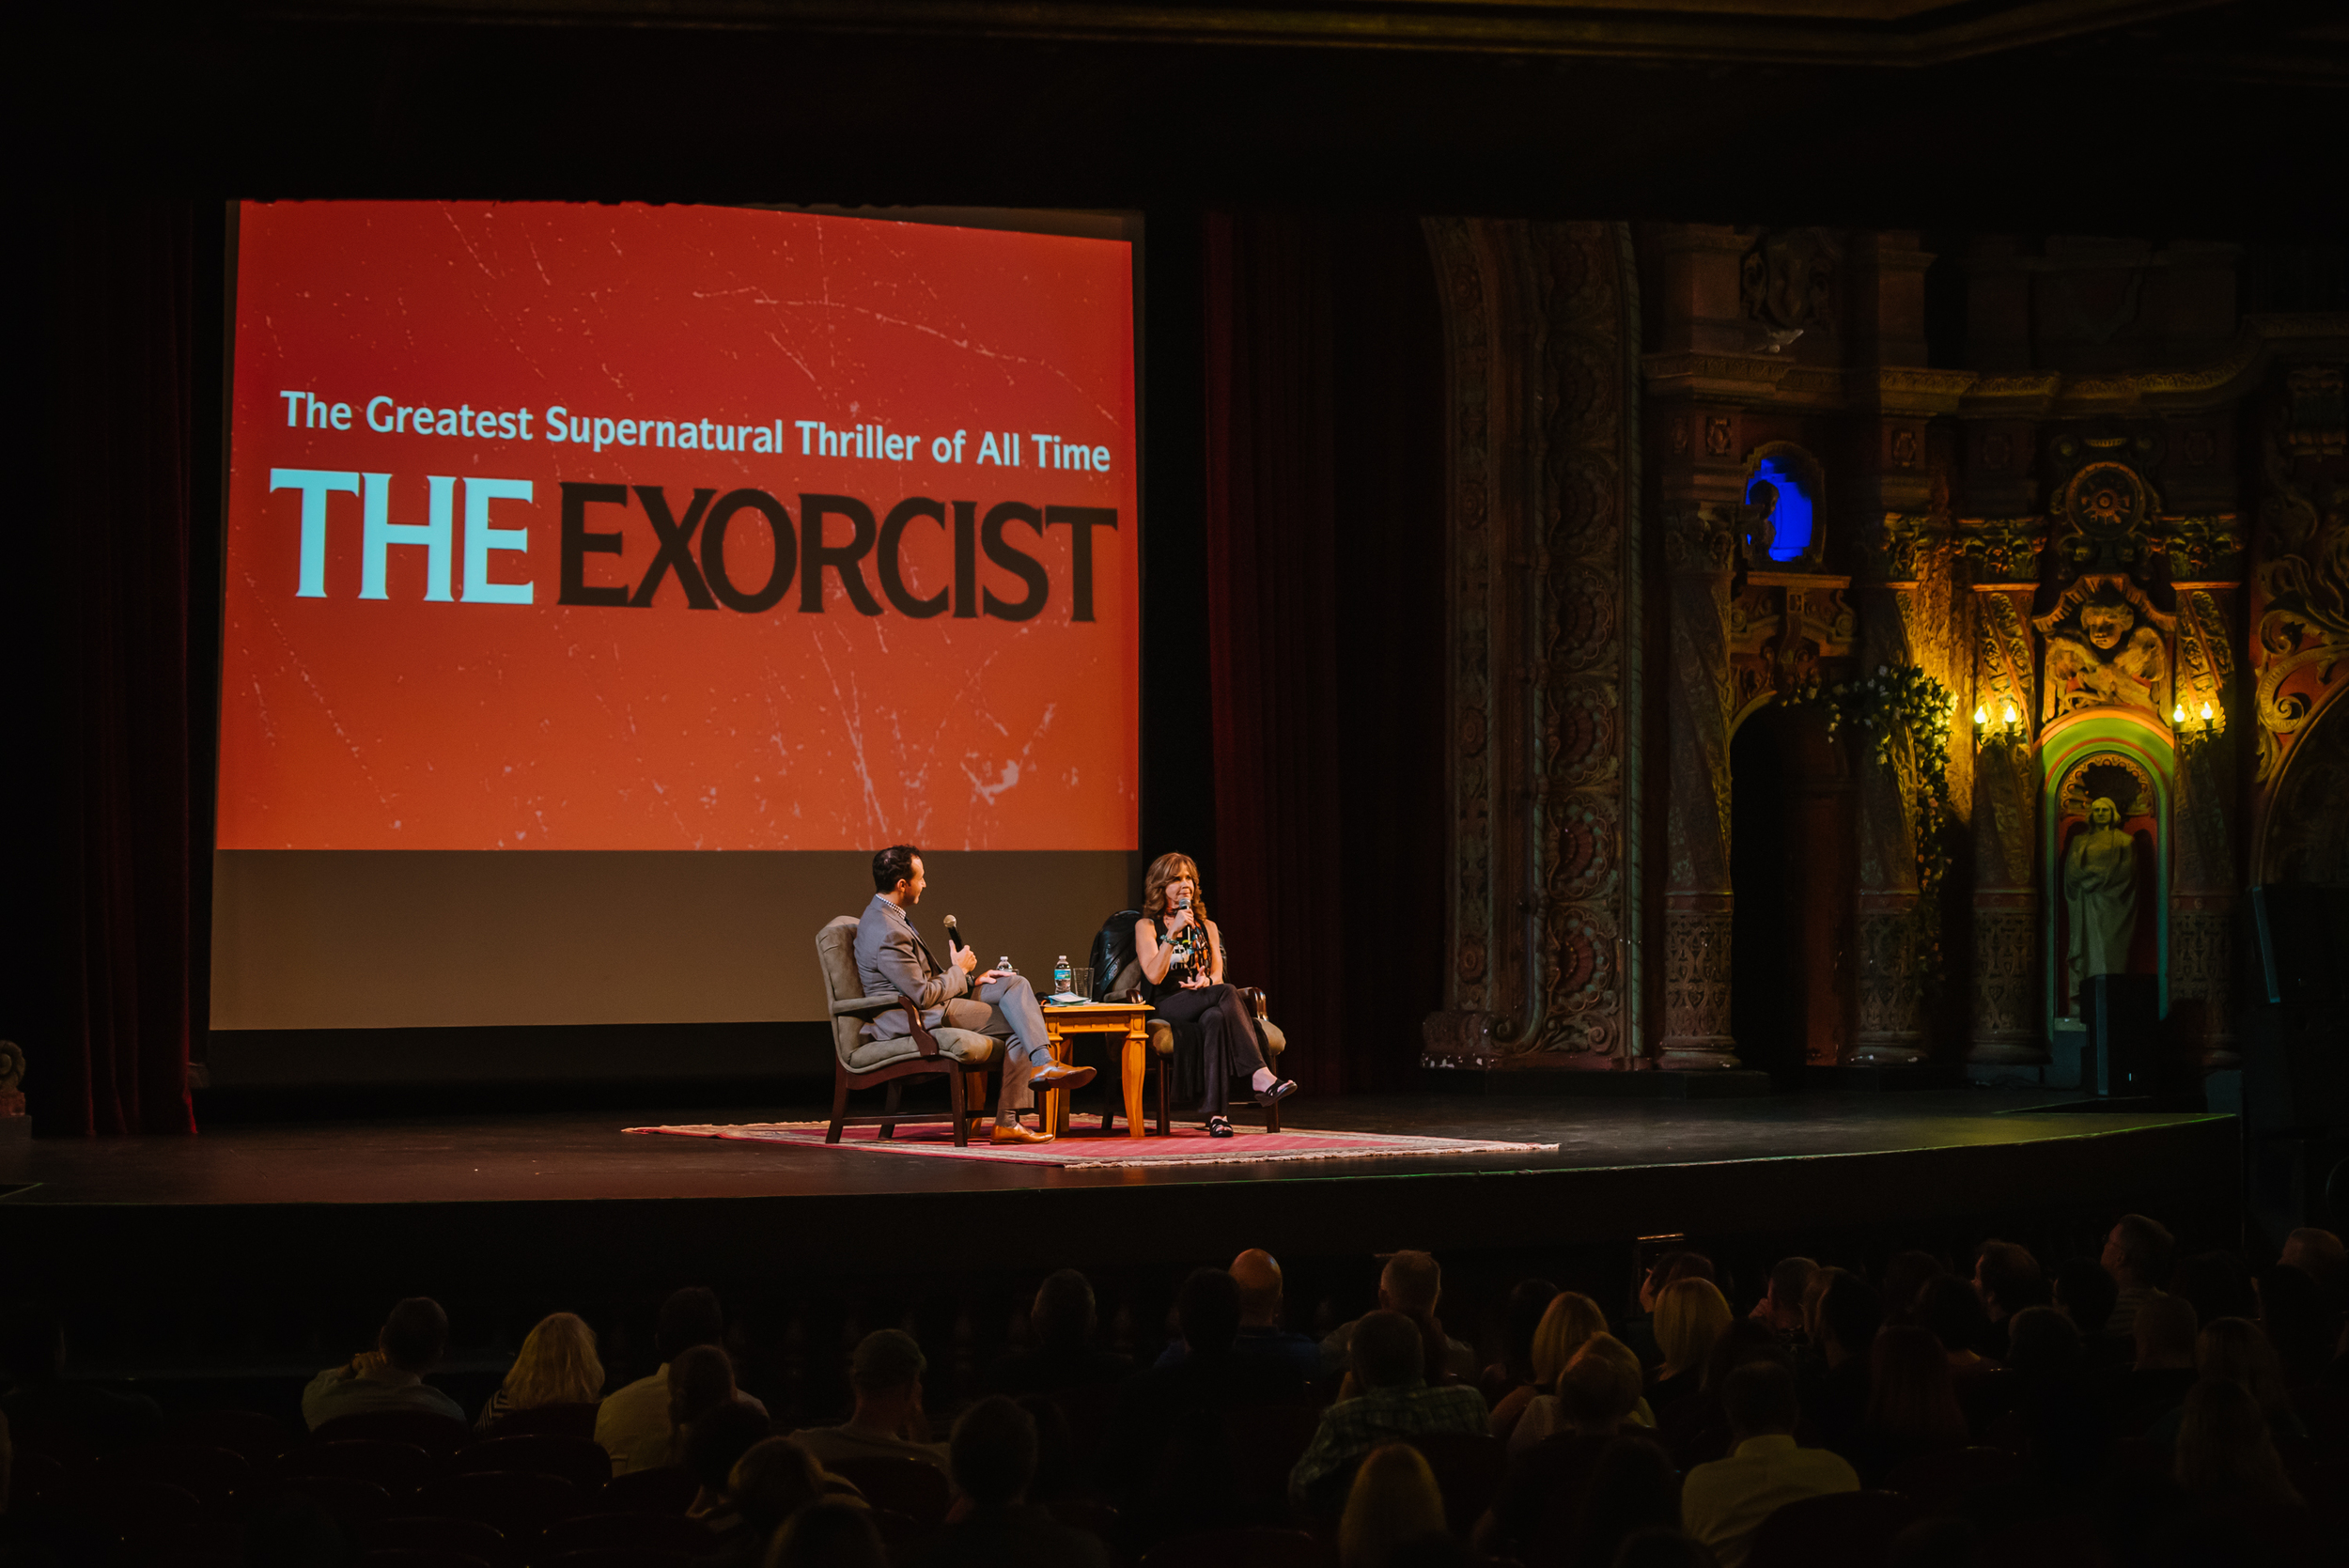 Then for Halloweeen I covered a meet and greet with Linda Blair of the Exorcist at the Tampa Theater....eeeee